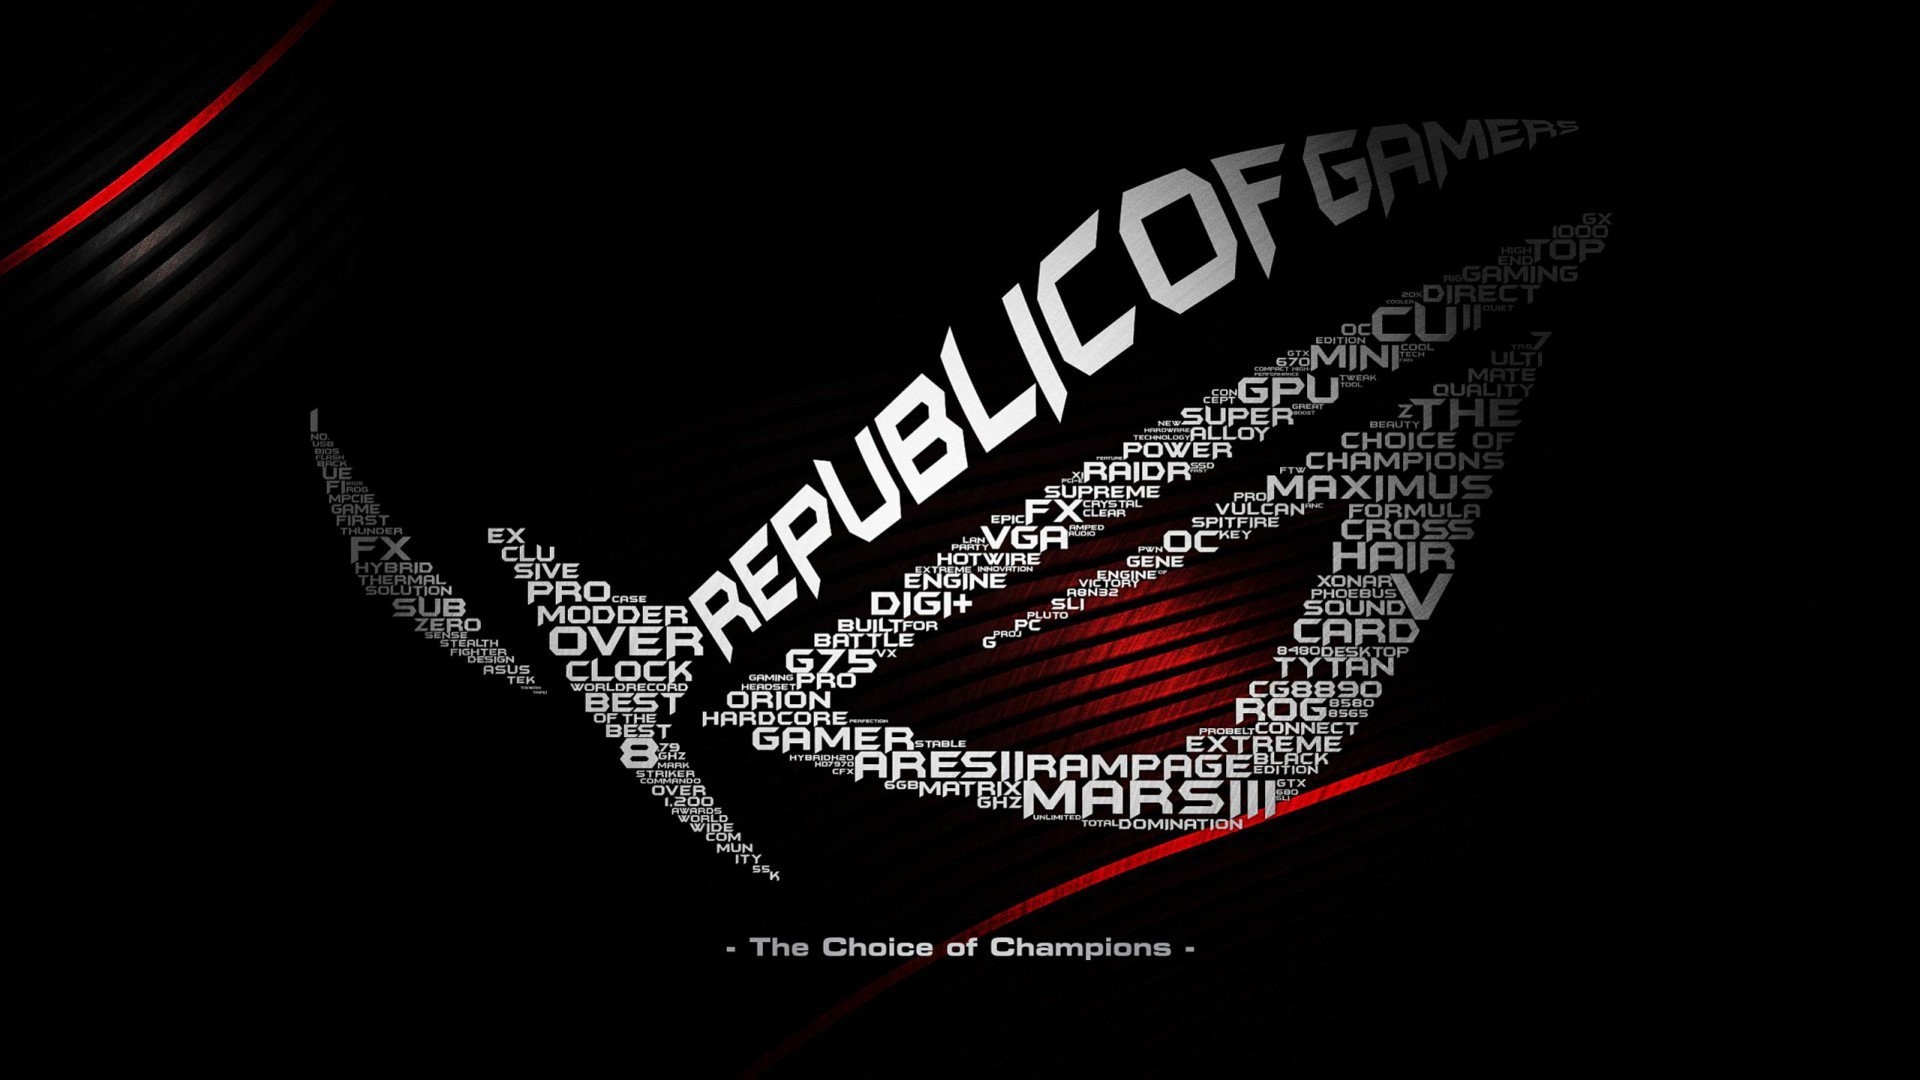 1920x1080 Technologie - Asus Computer Technologie Republic of Gamers Wallpaper